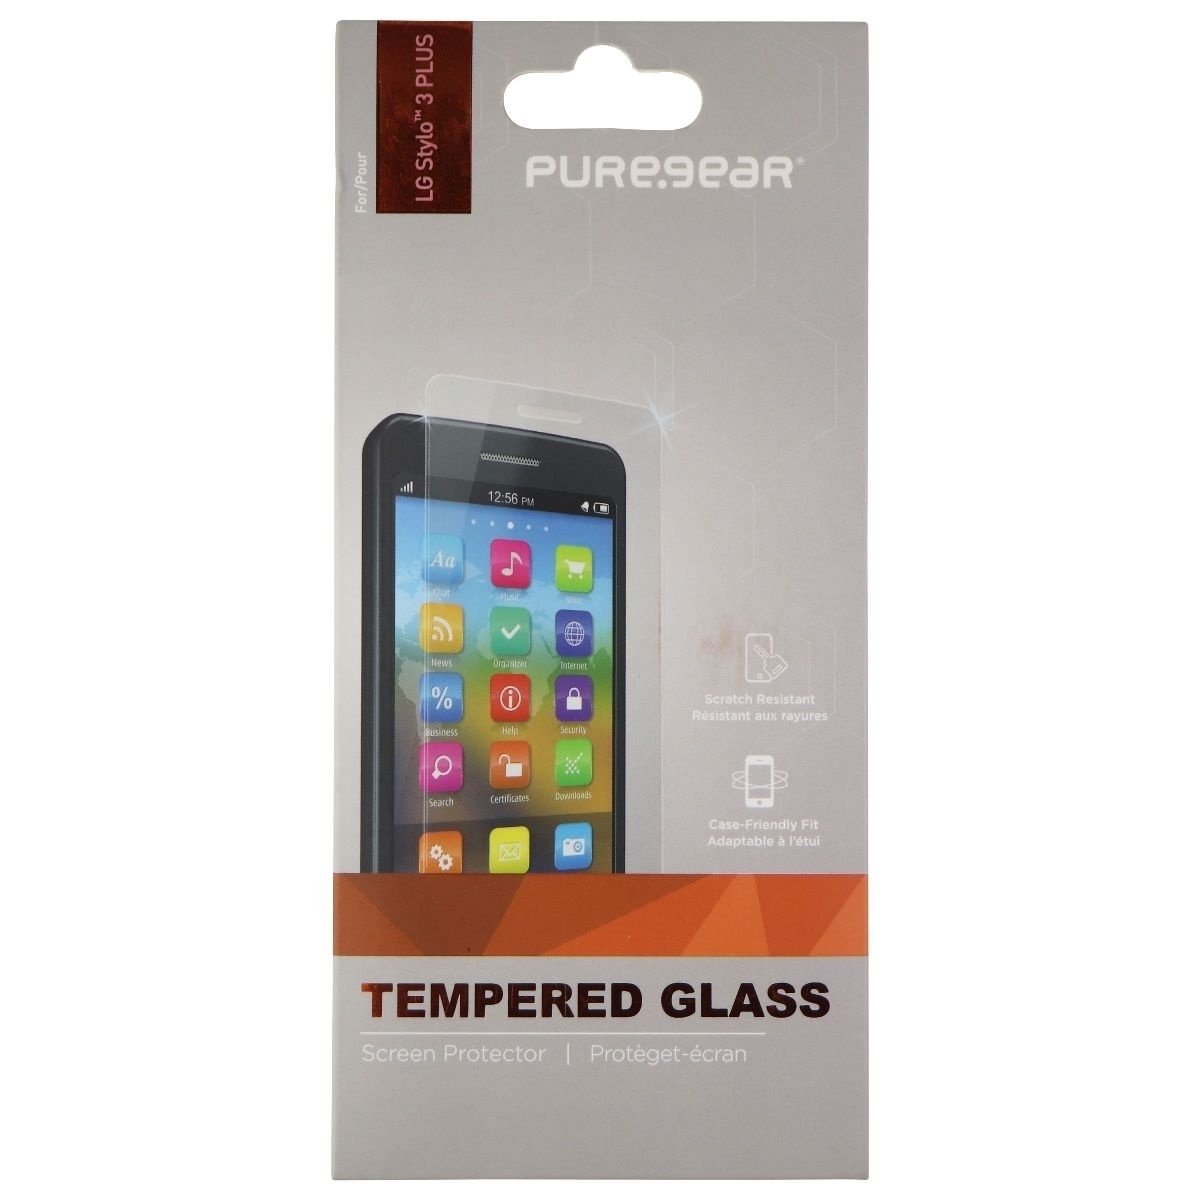 PureGear Tempered Glass Screen Protector For LG Stylo 3 PLUS - Clear